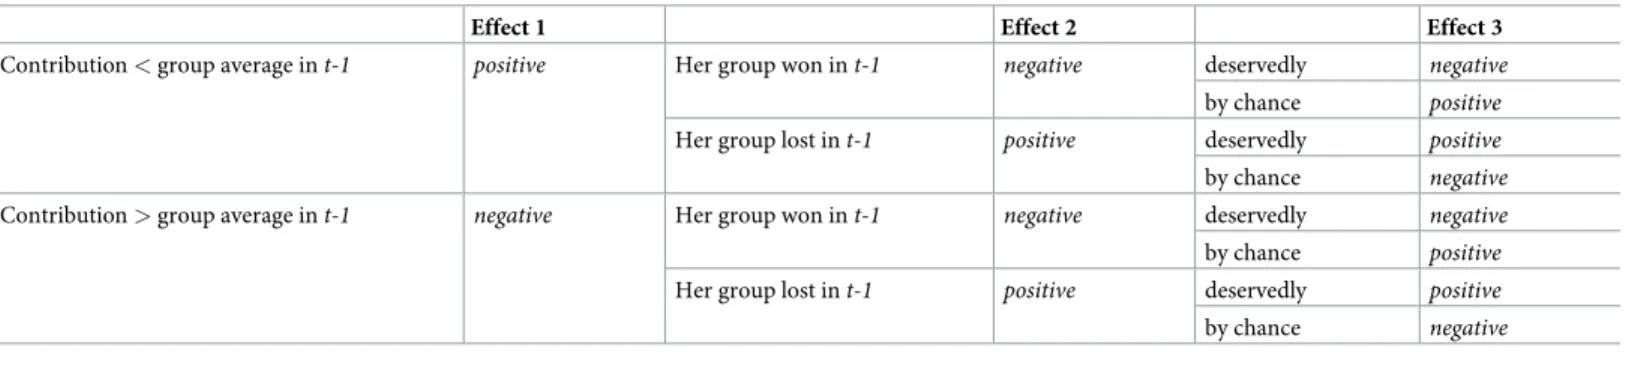 Table 1. Conjectures: Reaction to group average in the previous round, conditioned by winning / losing, deservedly / by chance.